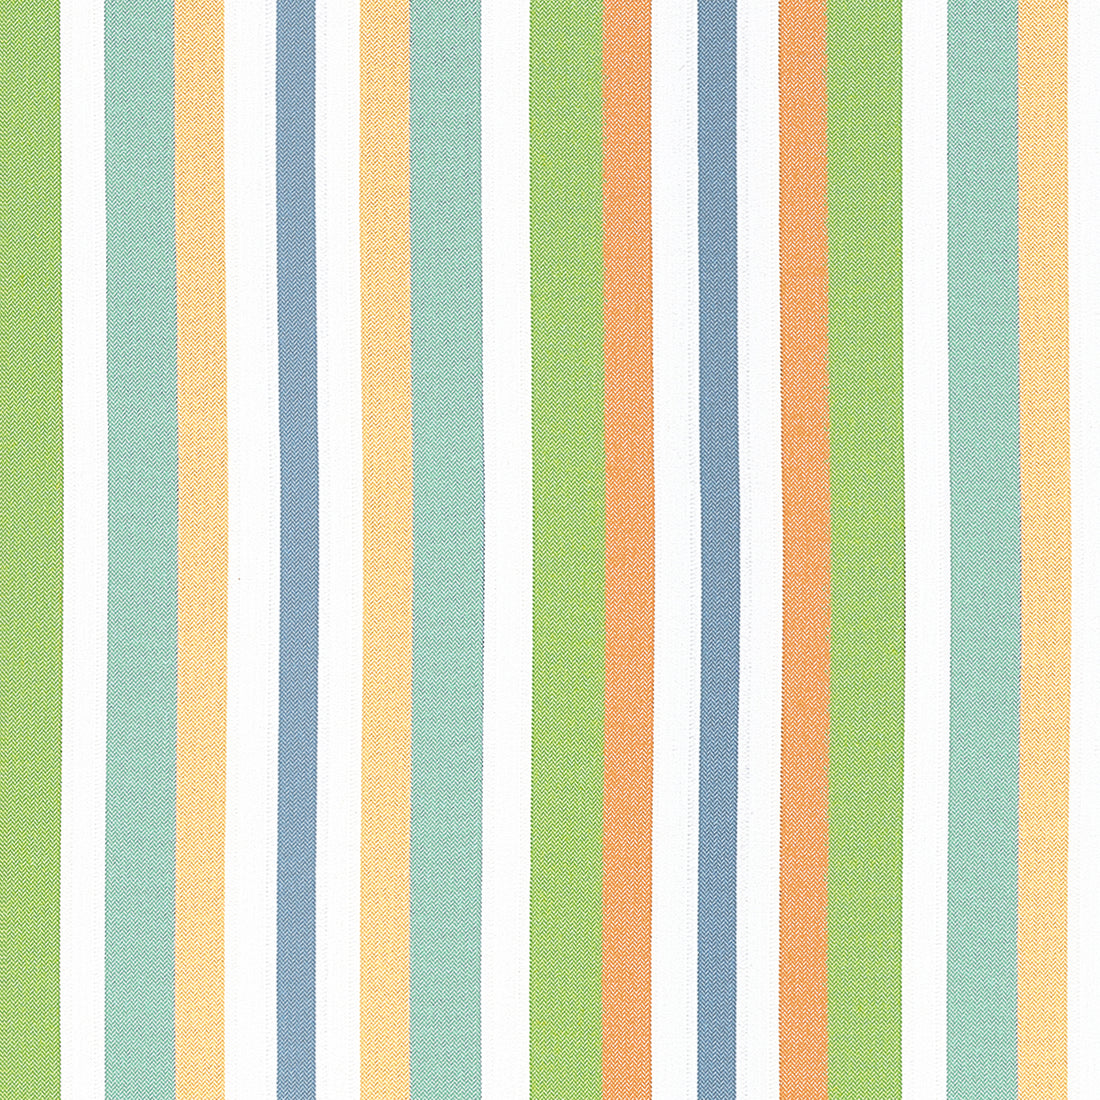 Kalea Stripe fabric in poolside color - pattern number W81667 - by Thibaut in the Locale collection